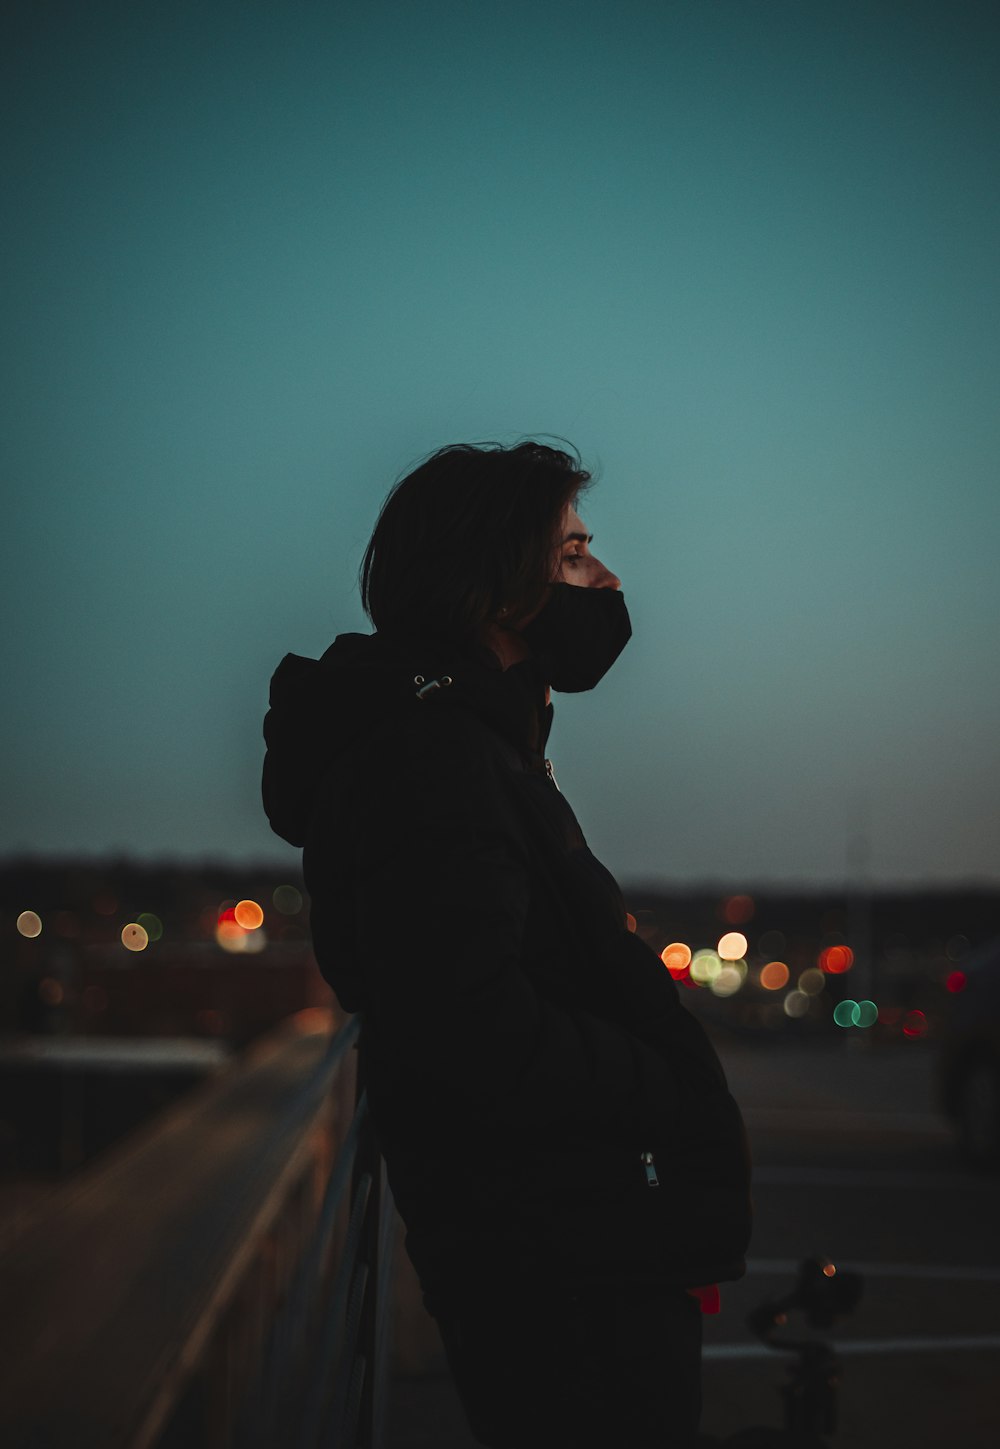 silhouette of woman standing during night time